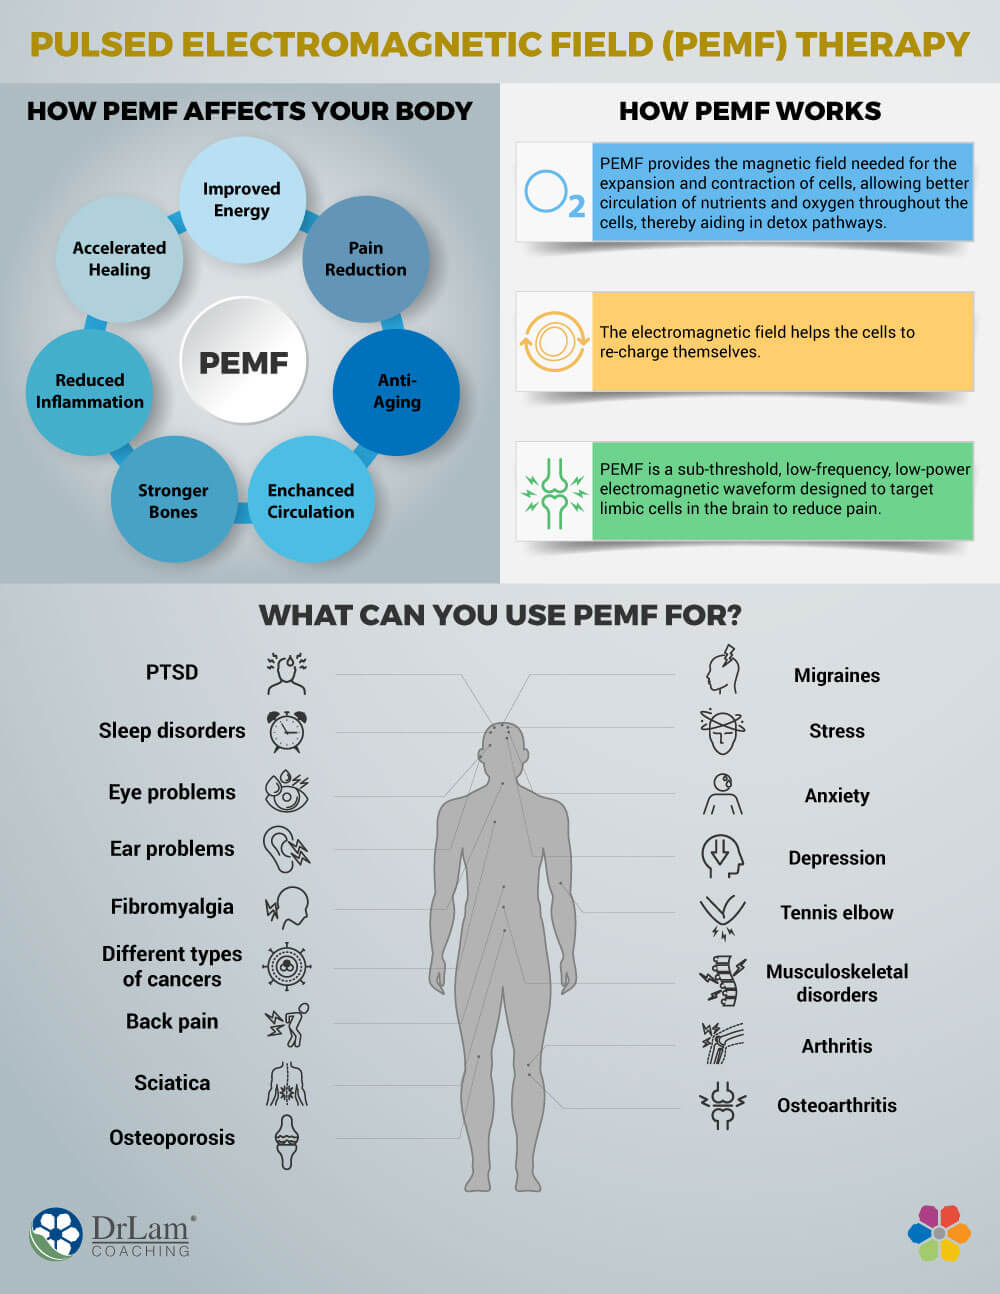 https://www.drlamcoaching.com/images/infographic-phased-electromagnetic-field-pemf-therapy-01.jpg